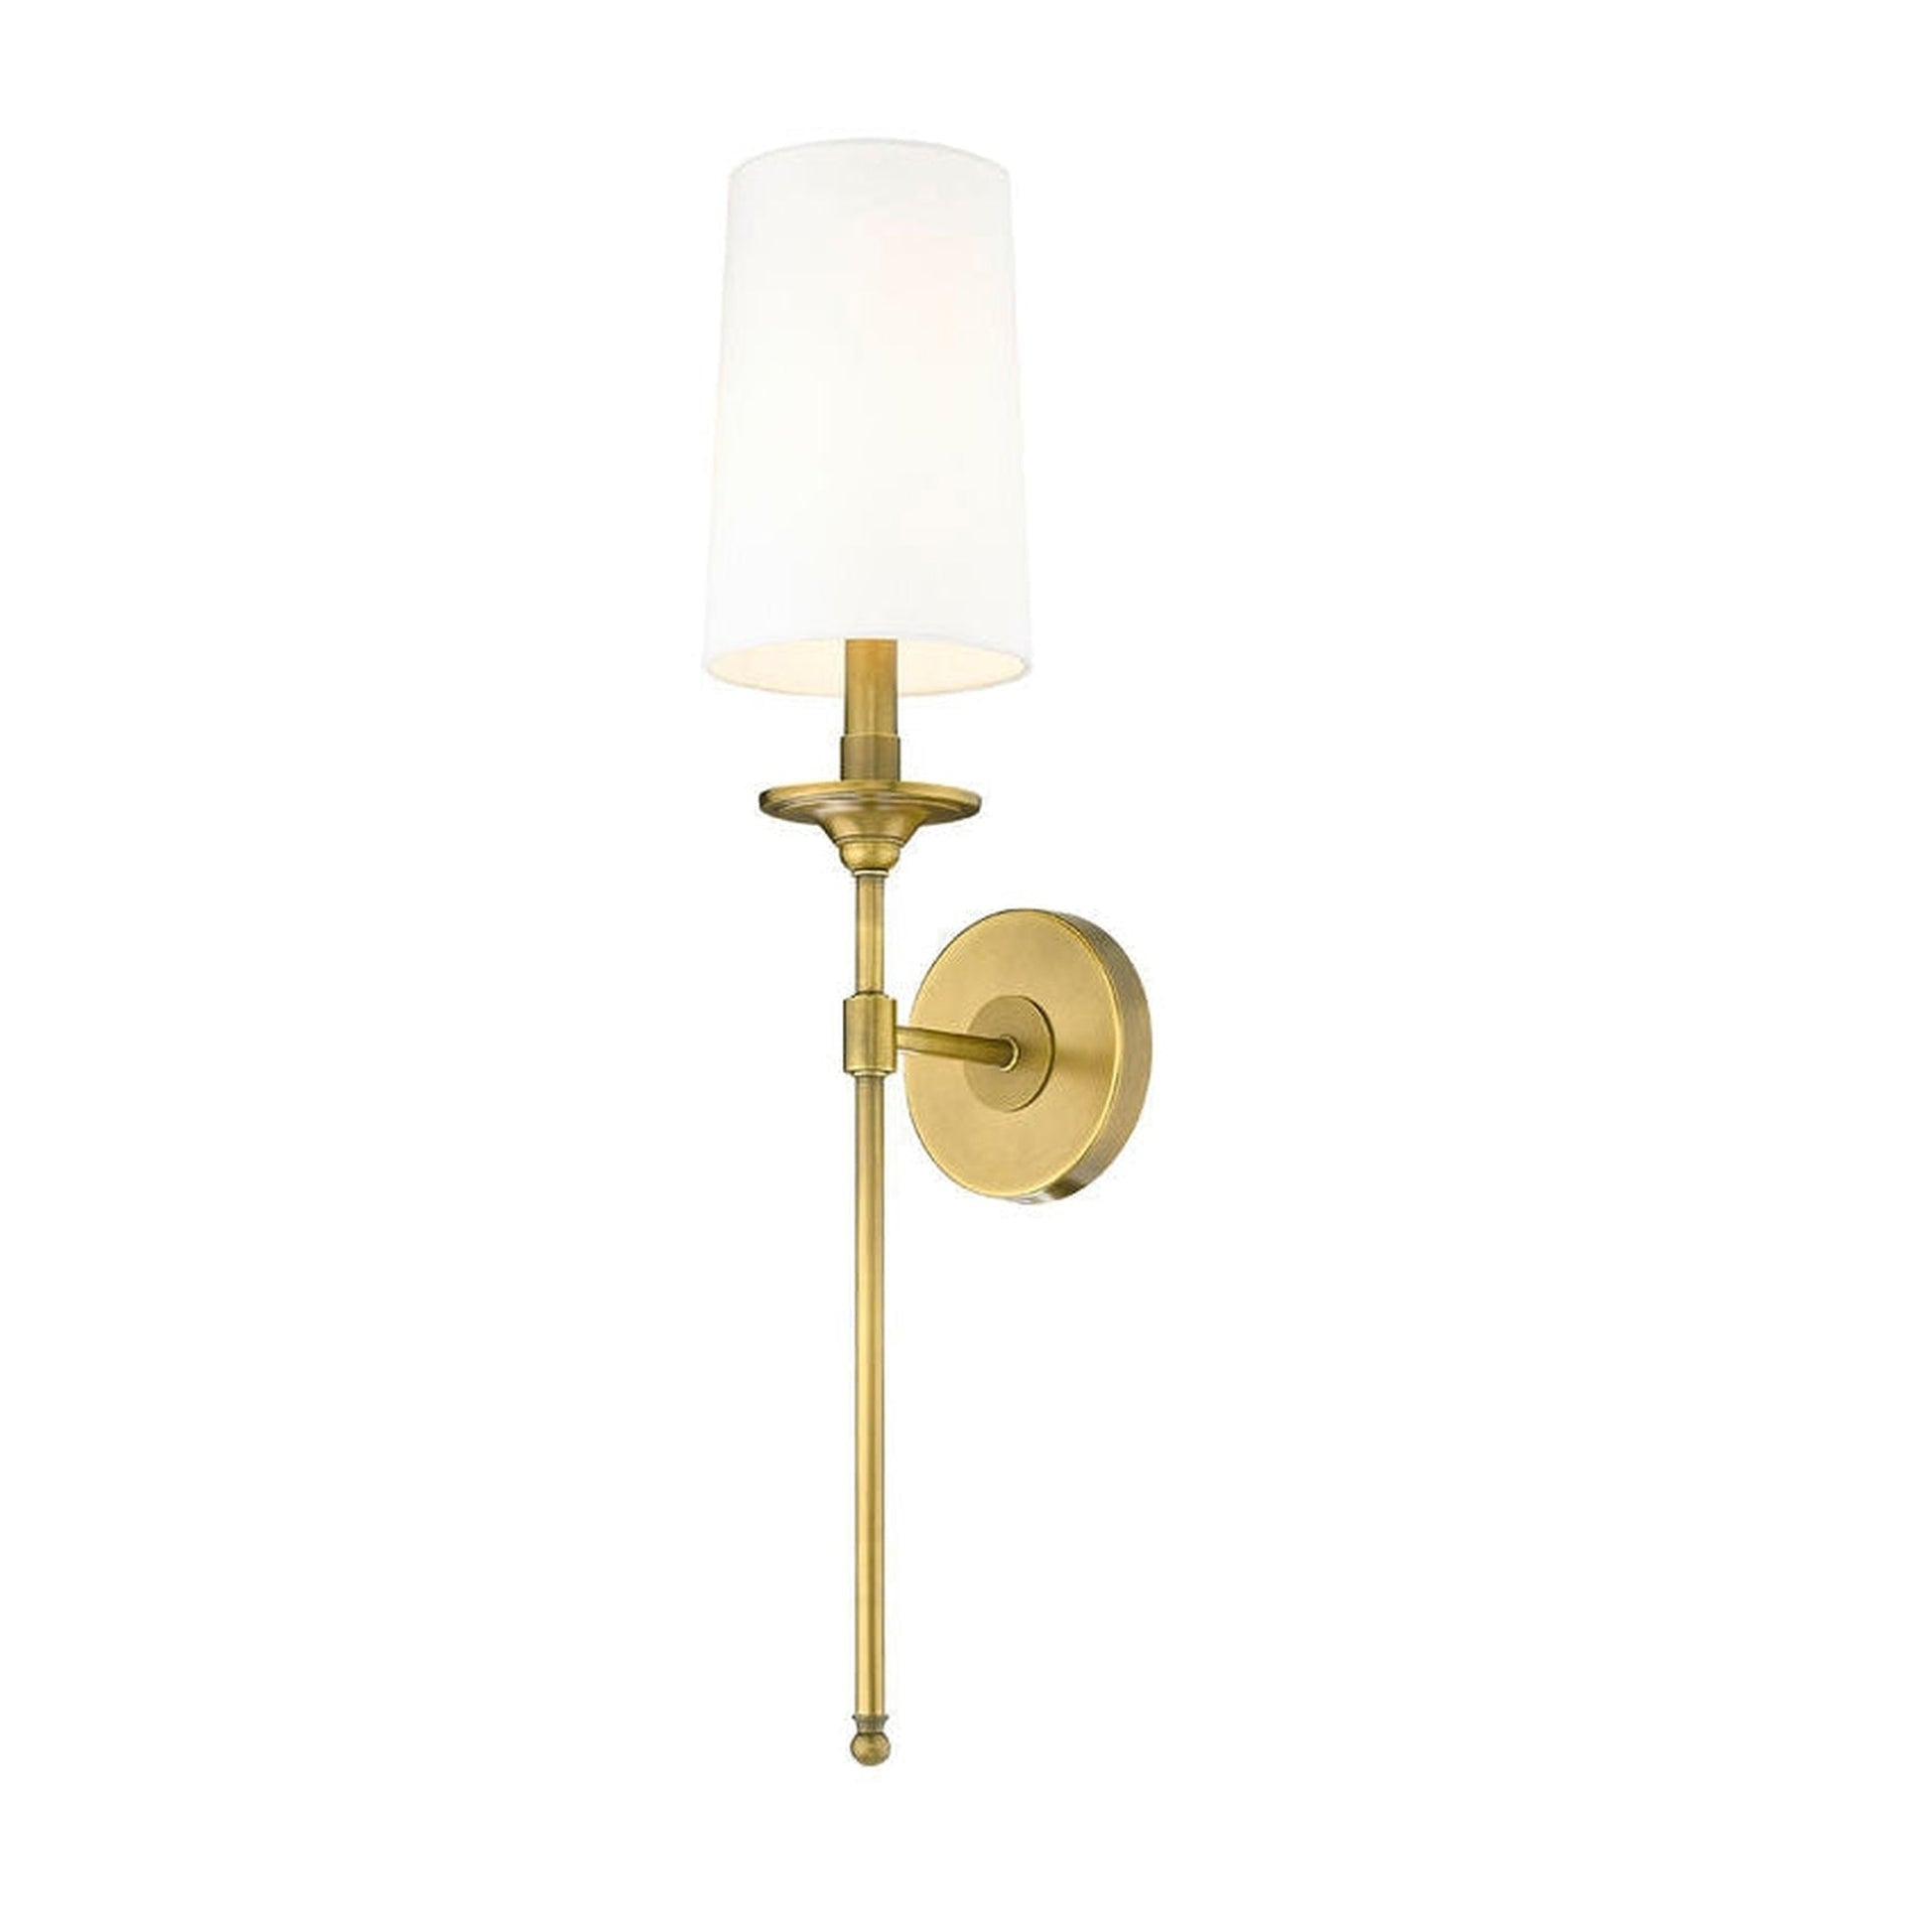 Z-Lite Emily 6" 1-Light Rubbed Brass Wall Sconce With White Fabric Shade